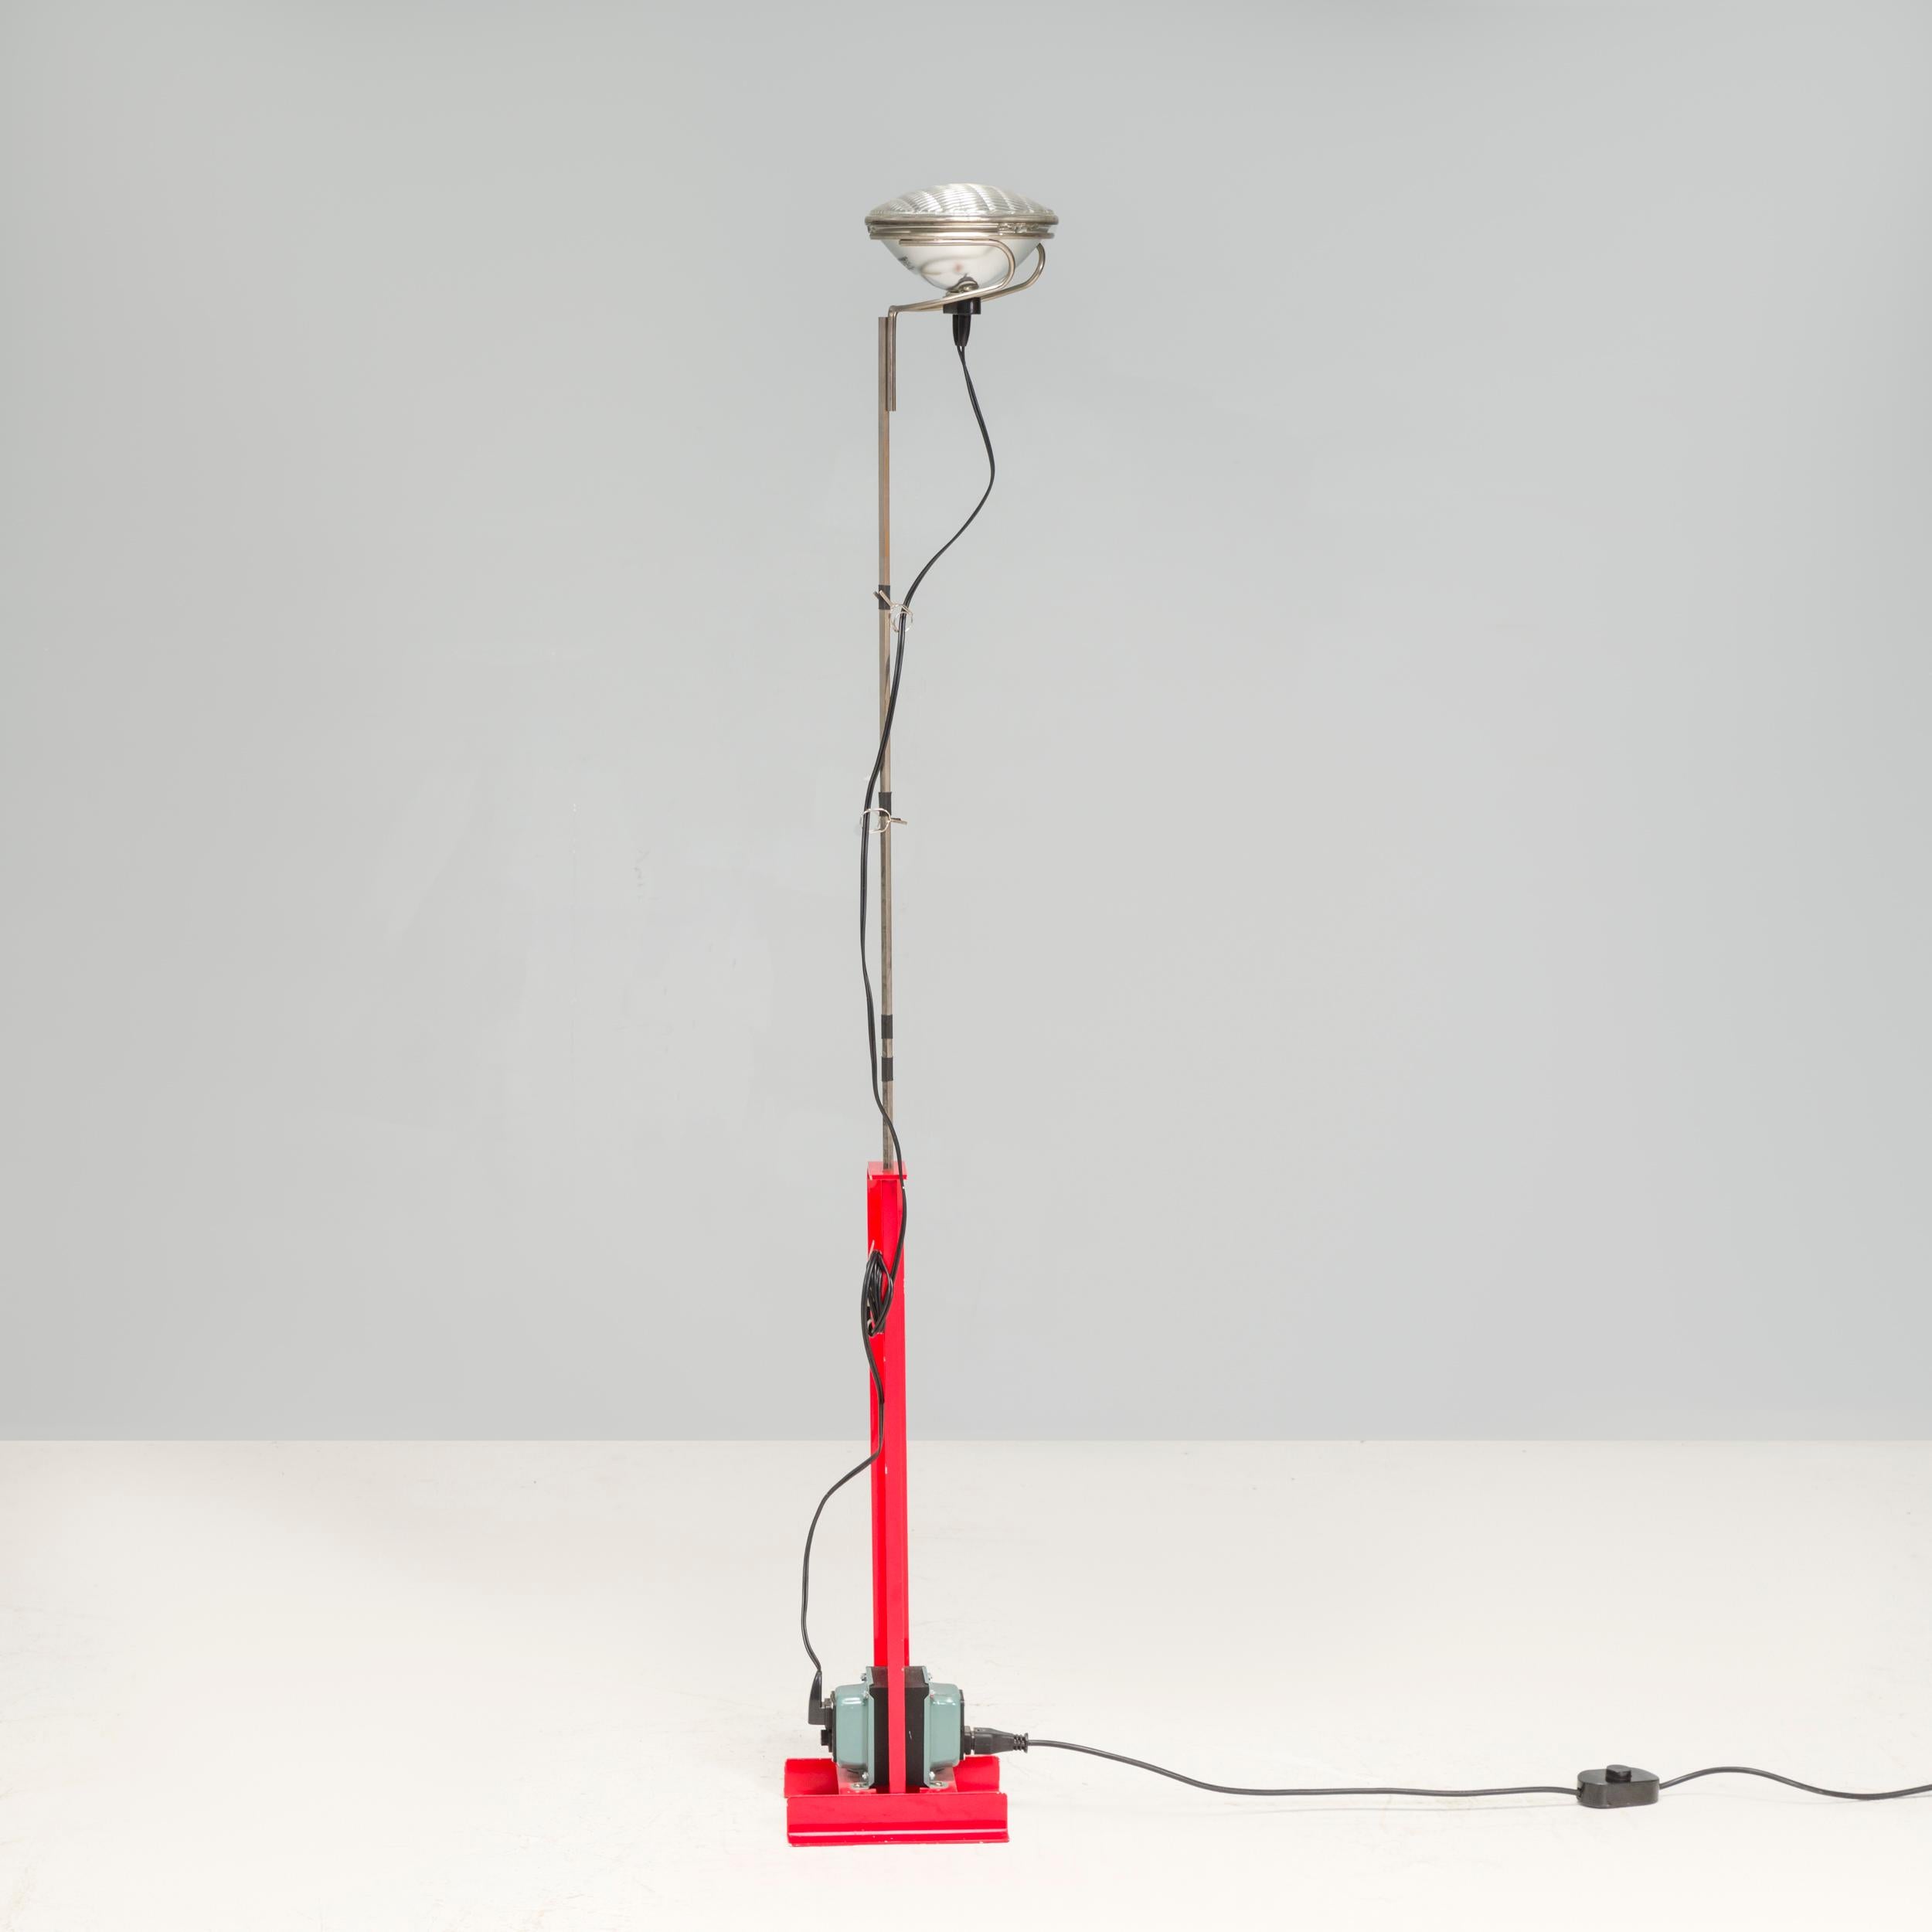 With its legendary silhouette and diffuser inspired by car headlights, the Toio floor lamp by Achille and Pier Giacomo Castiglioni (1962) is a 20thth Century icon. This model is featured in the permanent collection at the MoMa in New York.

Its